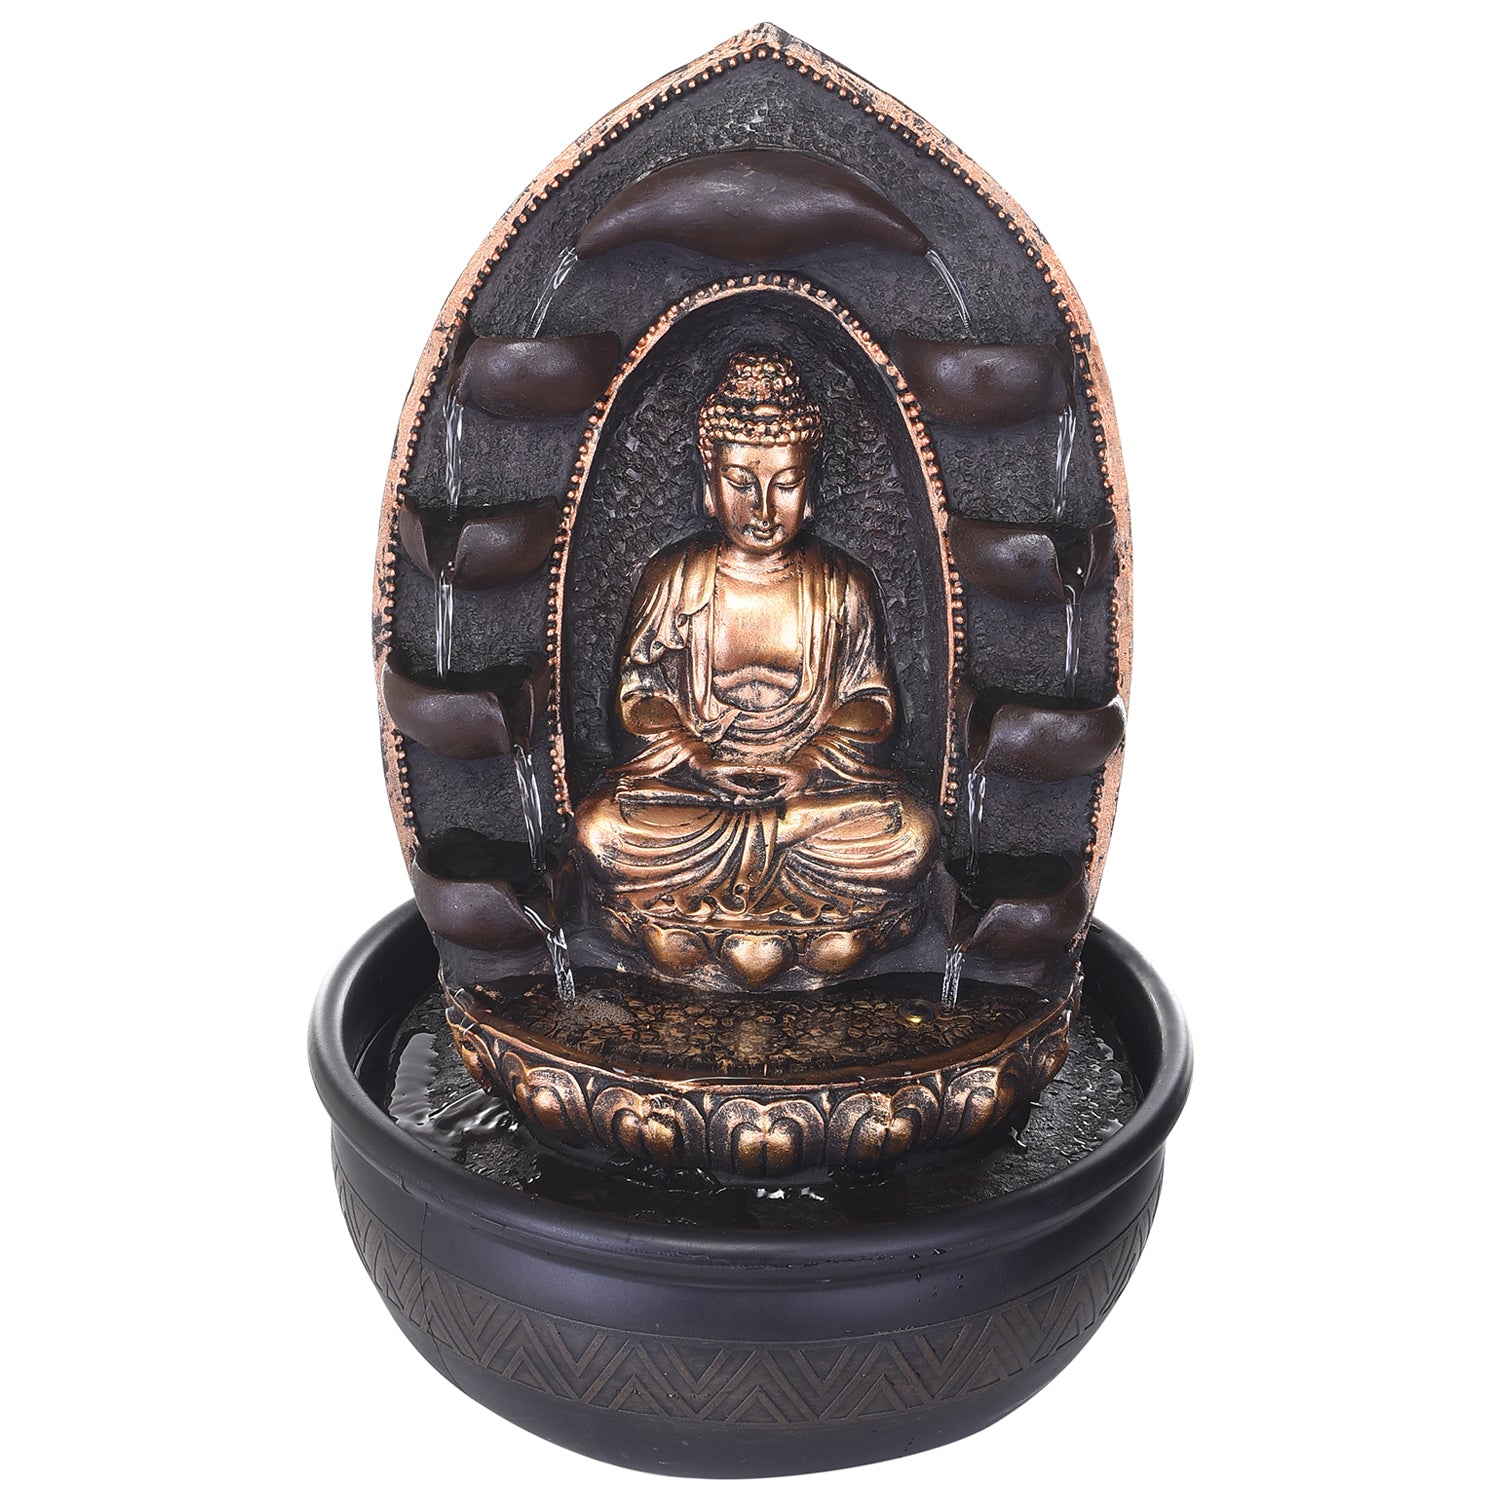 Polystone Brown and Golden Lotus Meditating Buddha Idol Water Fountain With Crystal Ball for Home/Office Decor 3